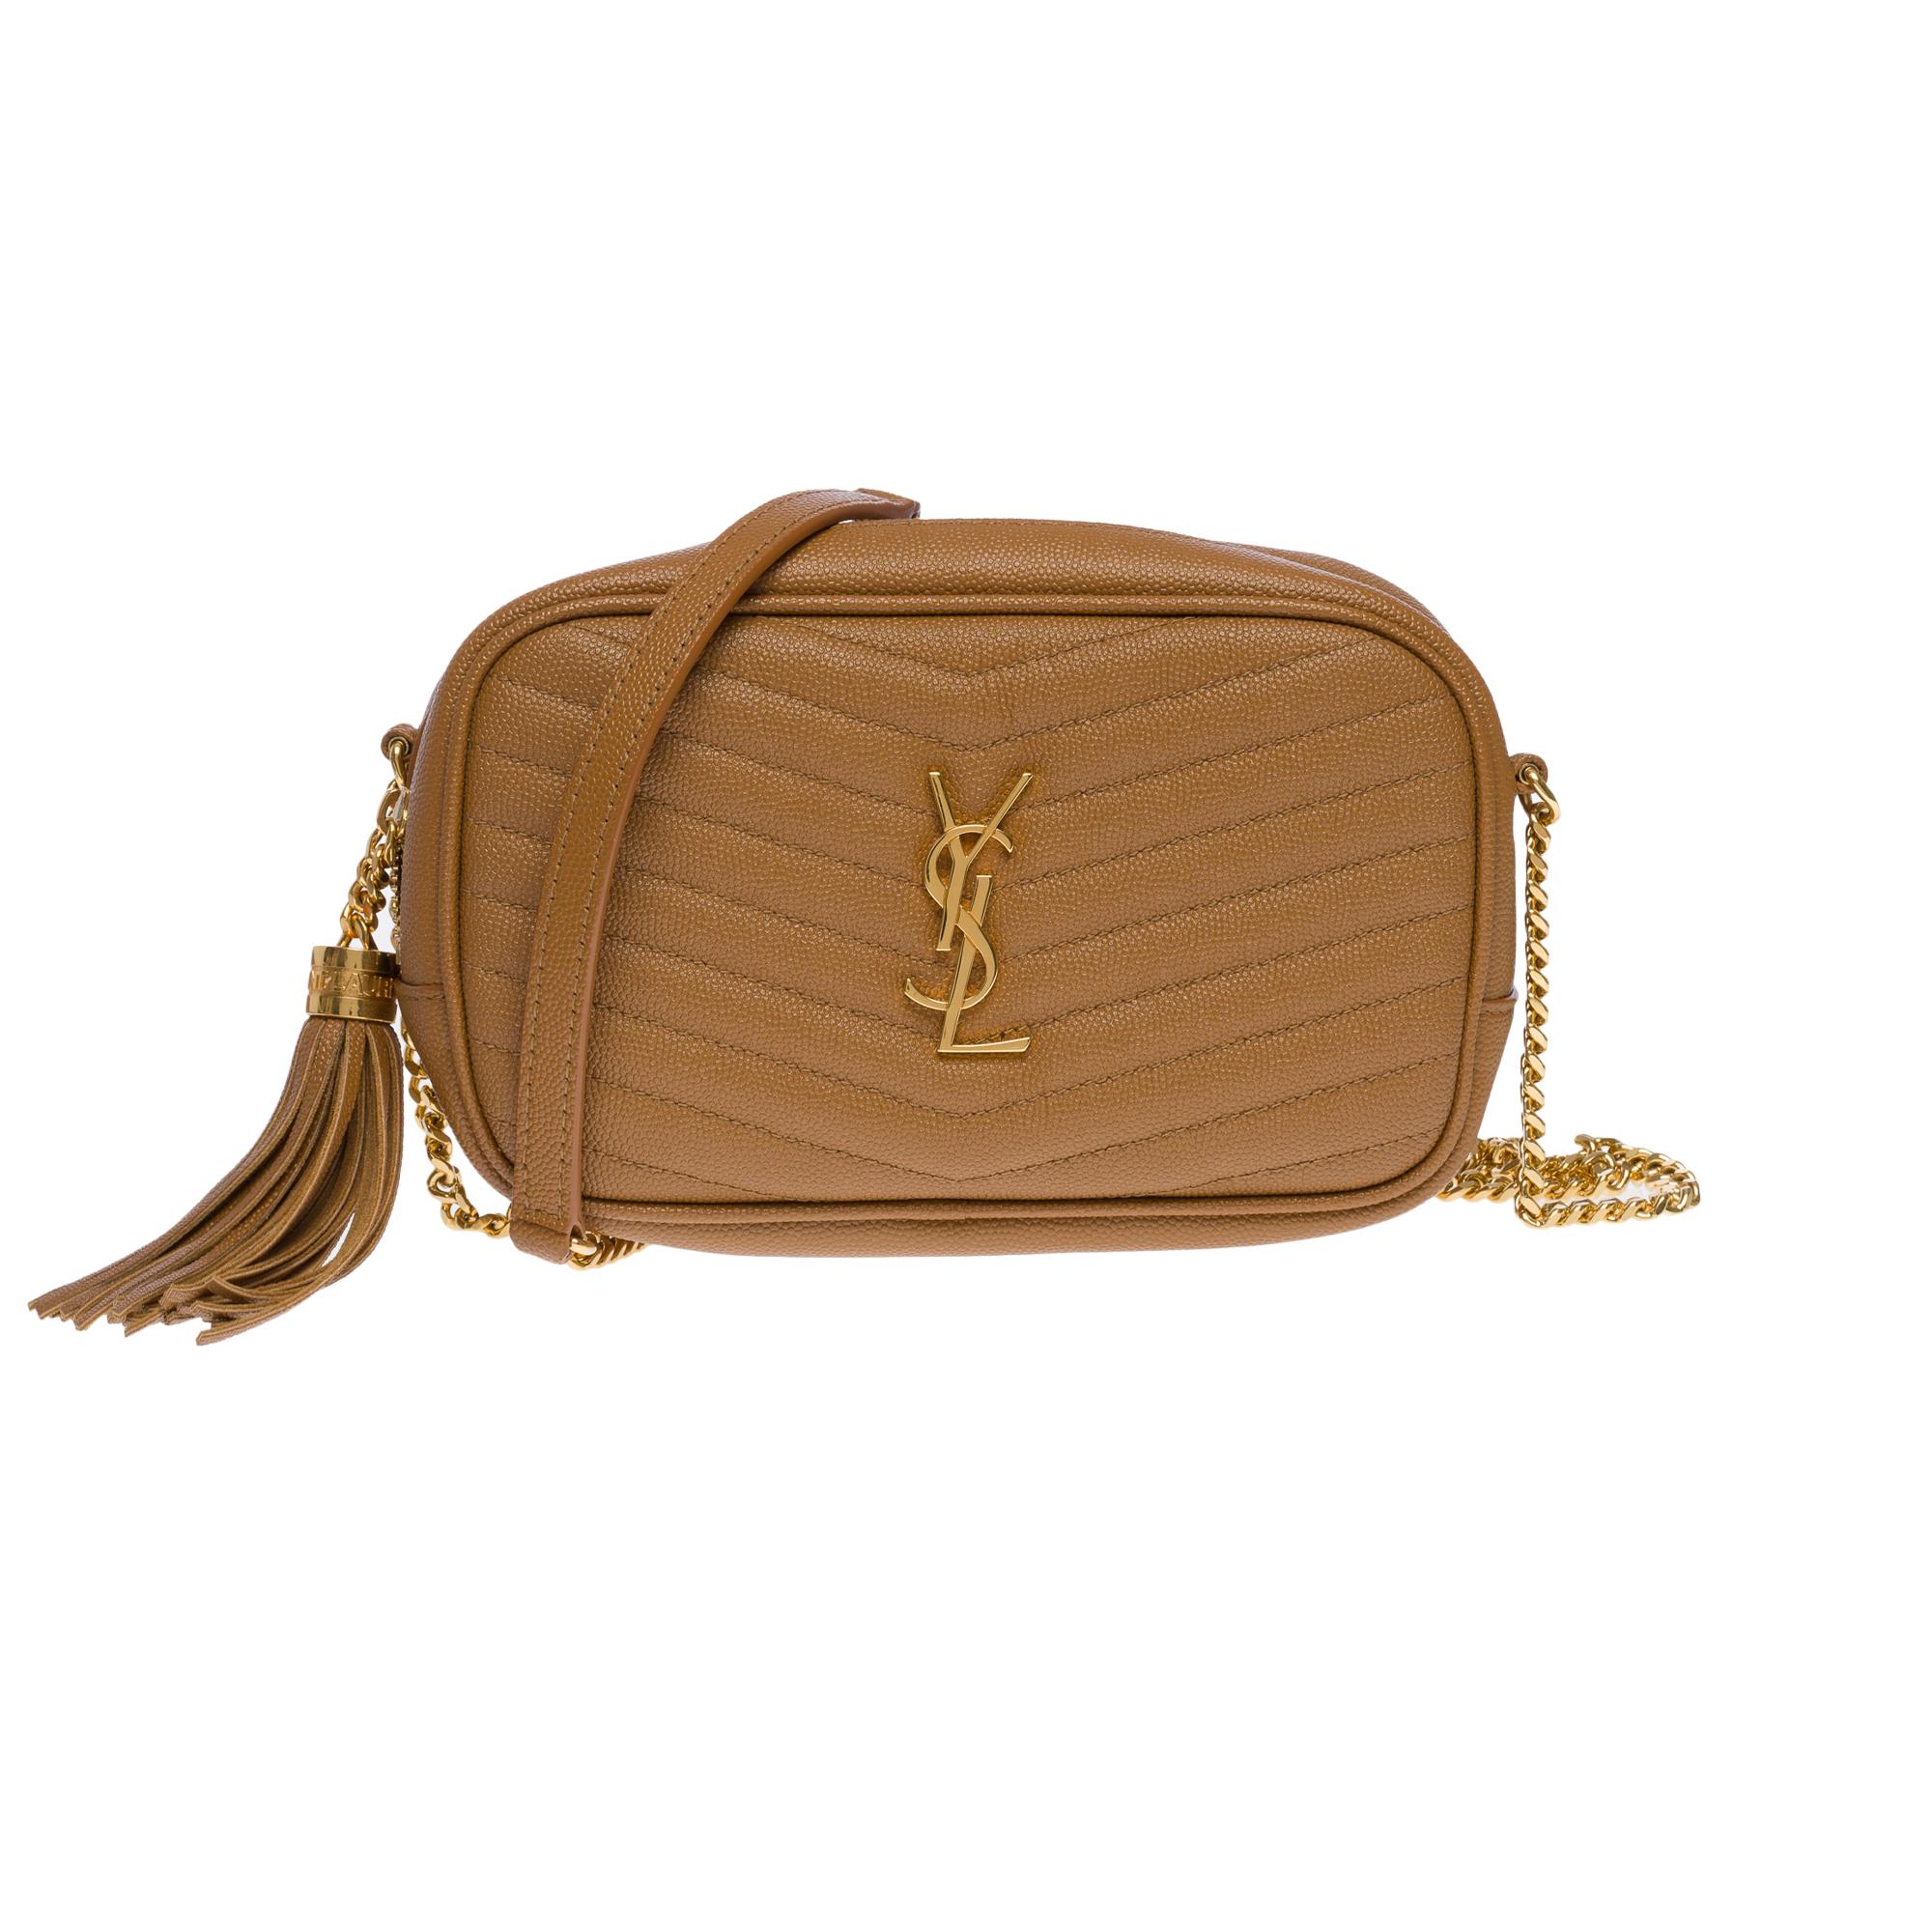 The Classy Saint Laurent Lou Camera shoulder bag in Camel calfskin leather stitched with the iconic quilted chevron decorated with the cassandra and a removable leather tassel. Gold metal hardware, gold metal chain handle for shoulder or crossbody